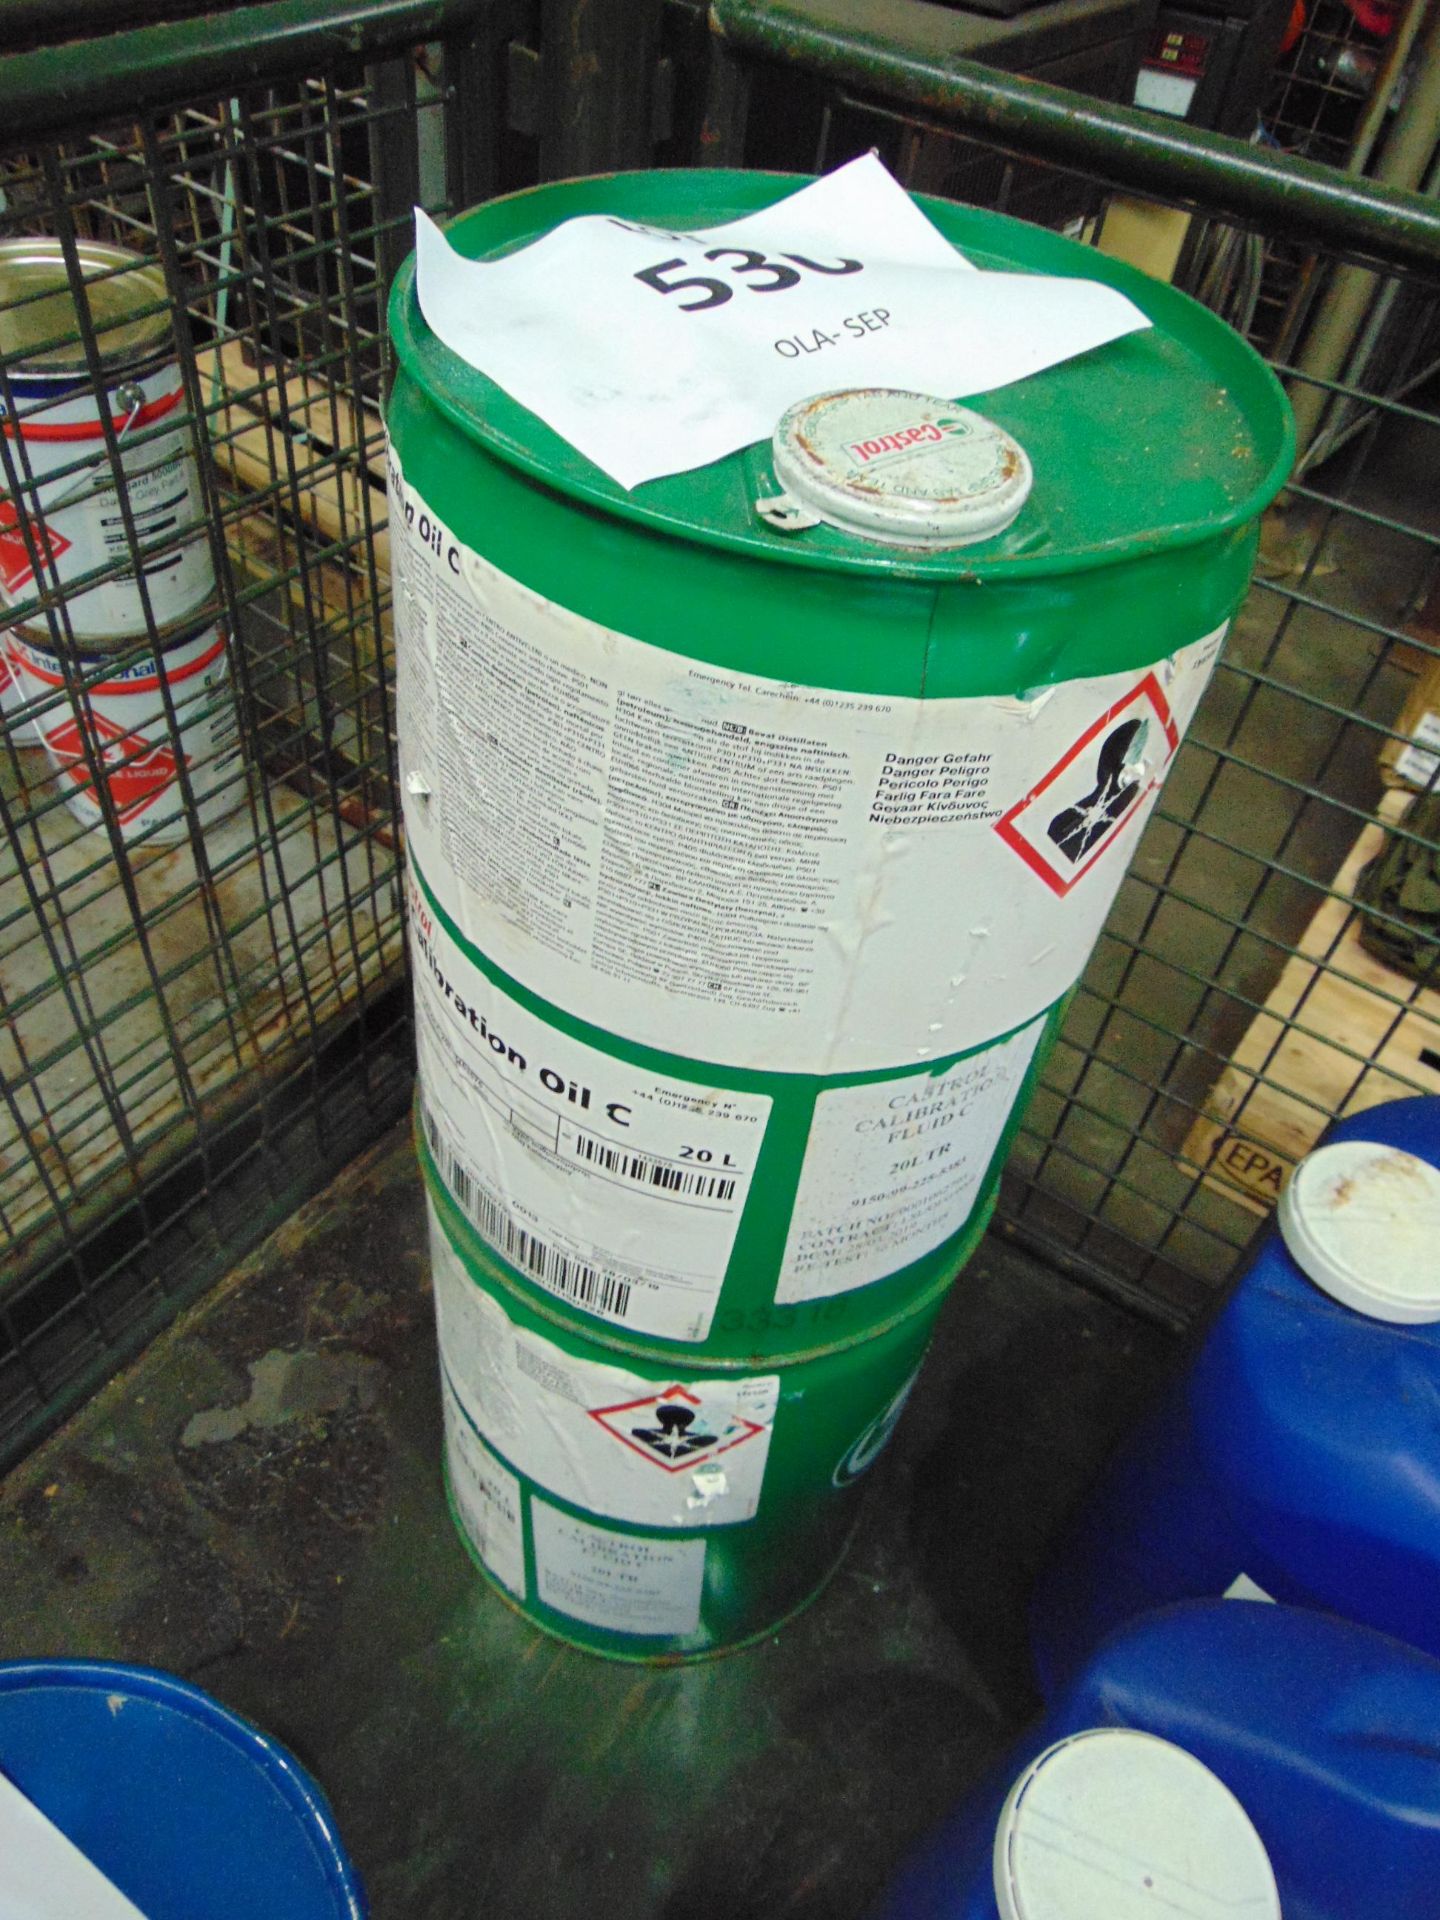 2X 20 LITRES DRUMS OF CASTROL CALIBRATION OIL C - Image 2 of 3